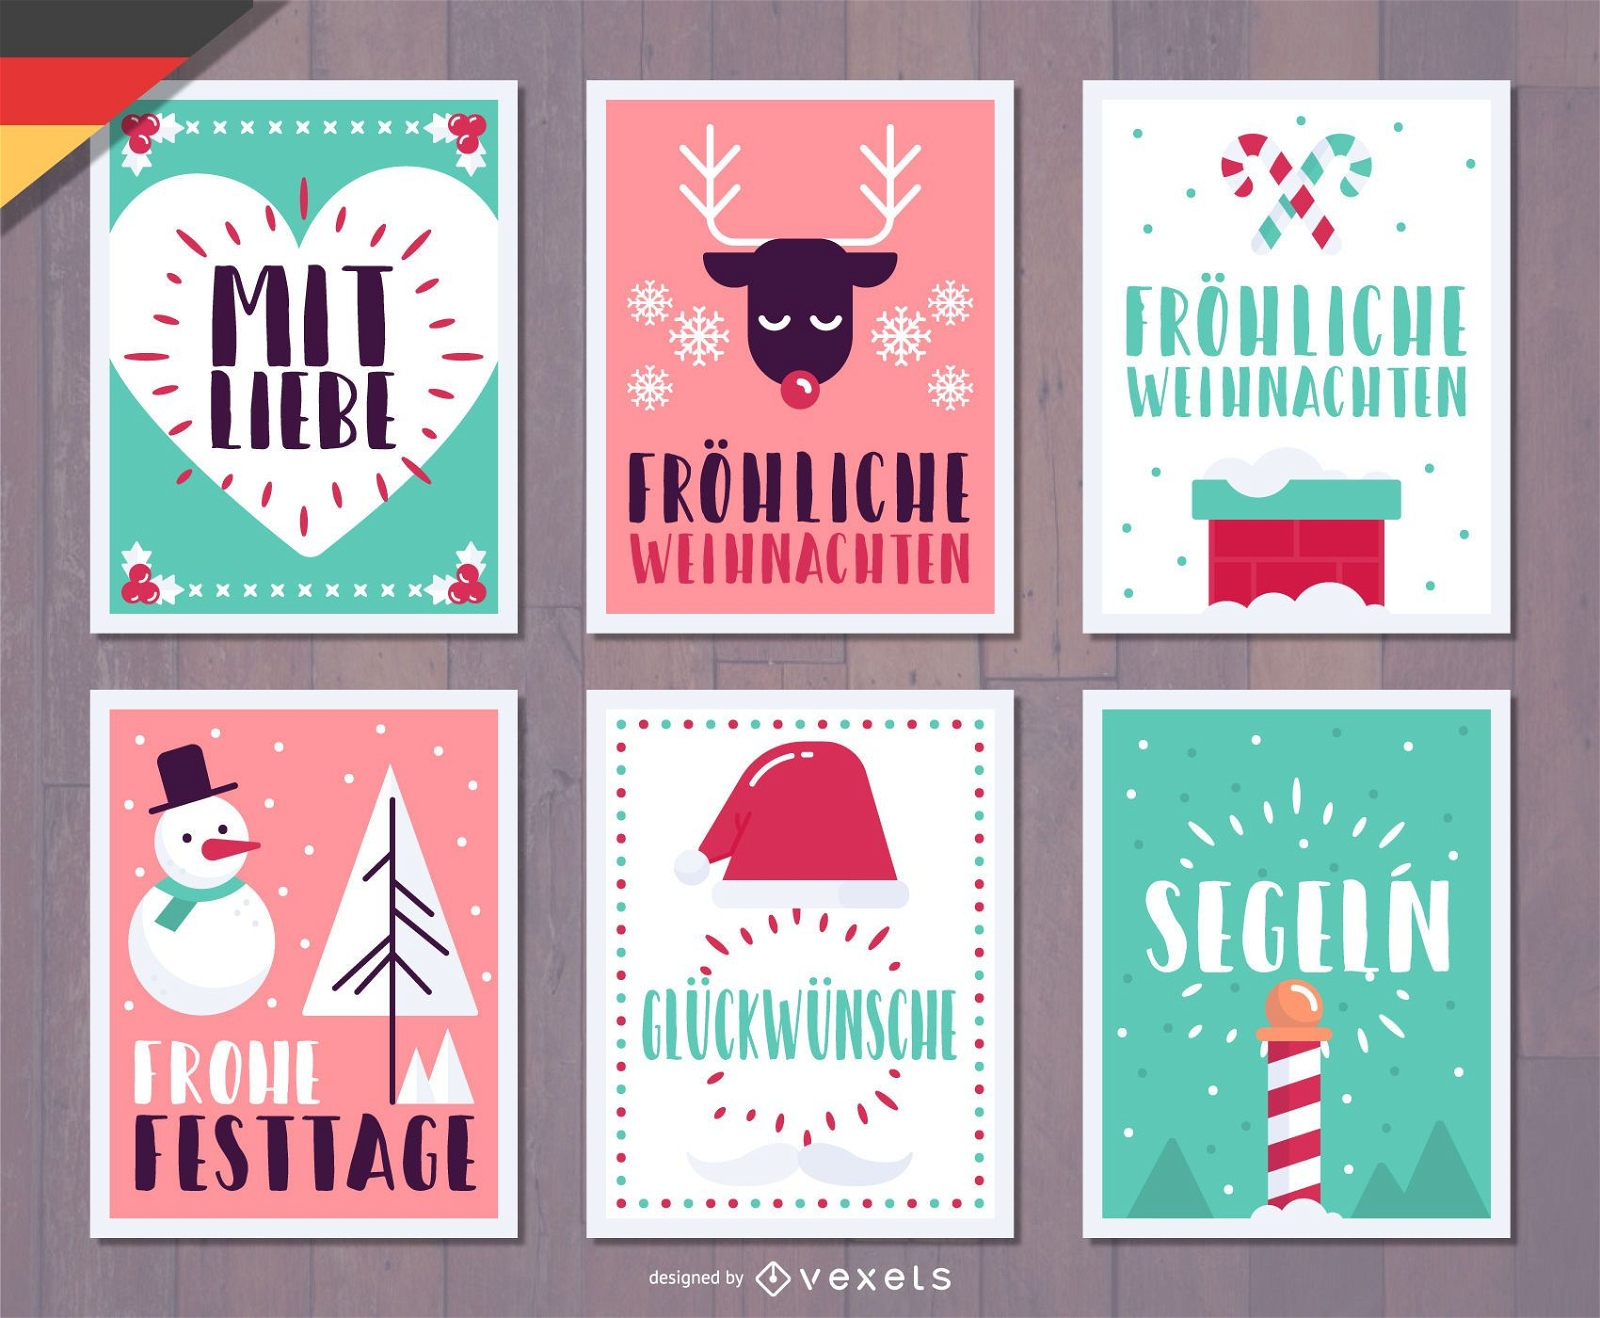 German Fröhliche Weihnachten Christmas Card Pack Vector Download intended for Free Printable German Christmas Cards